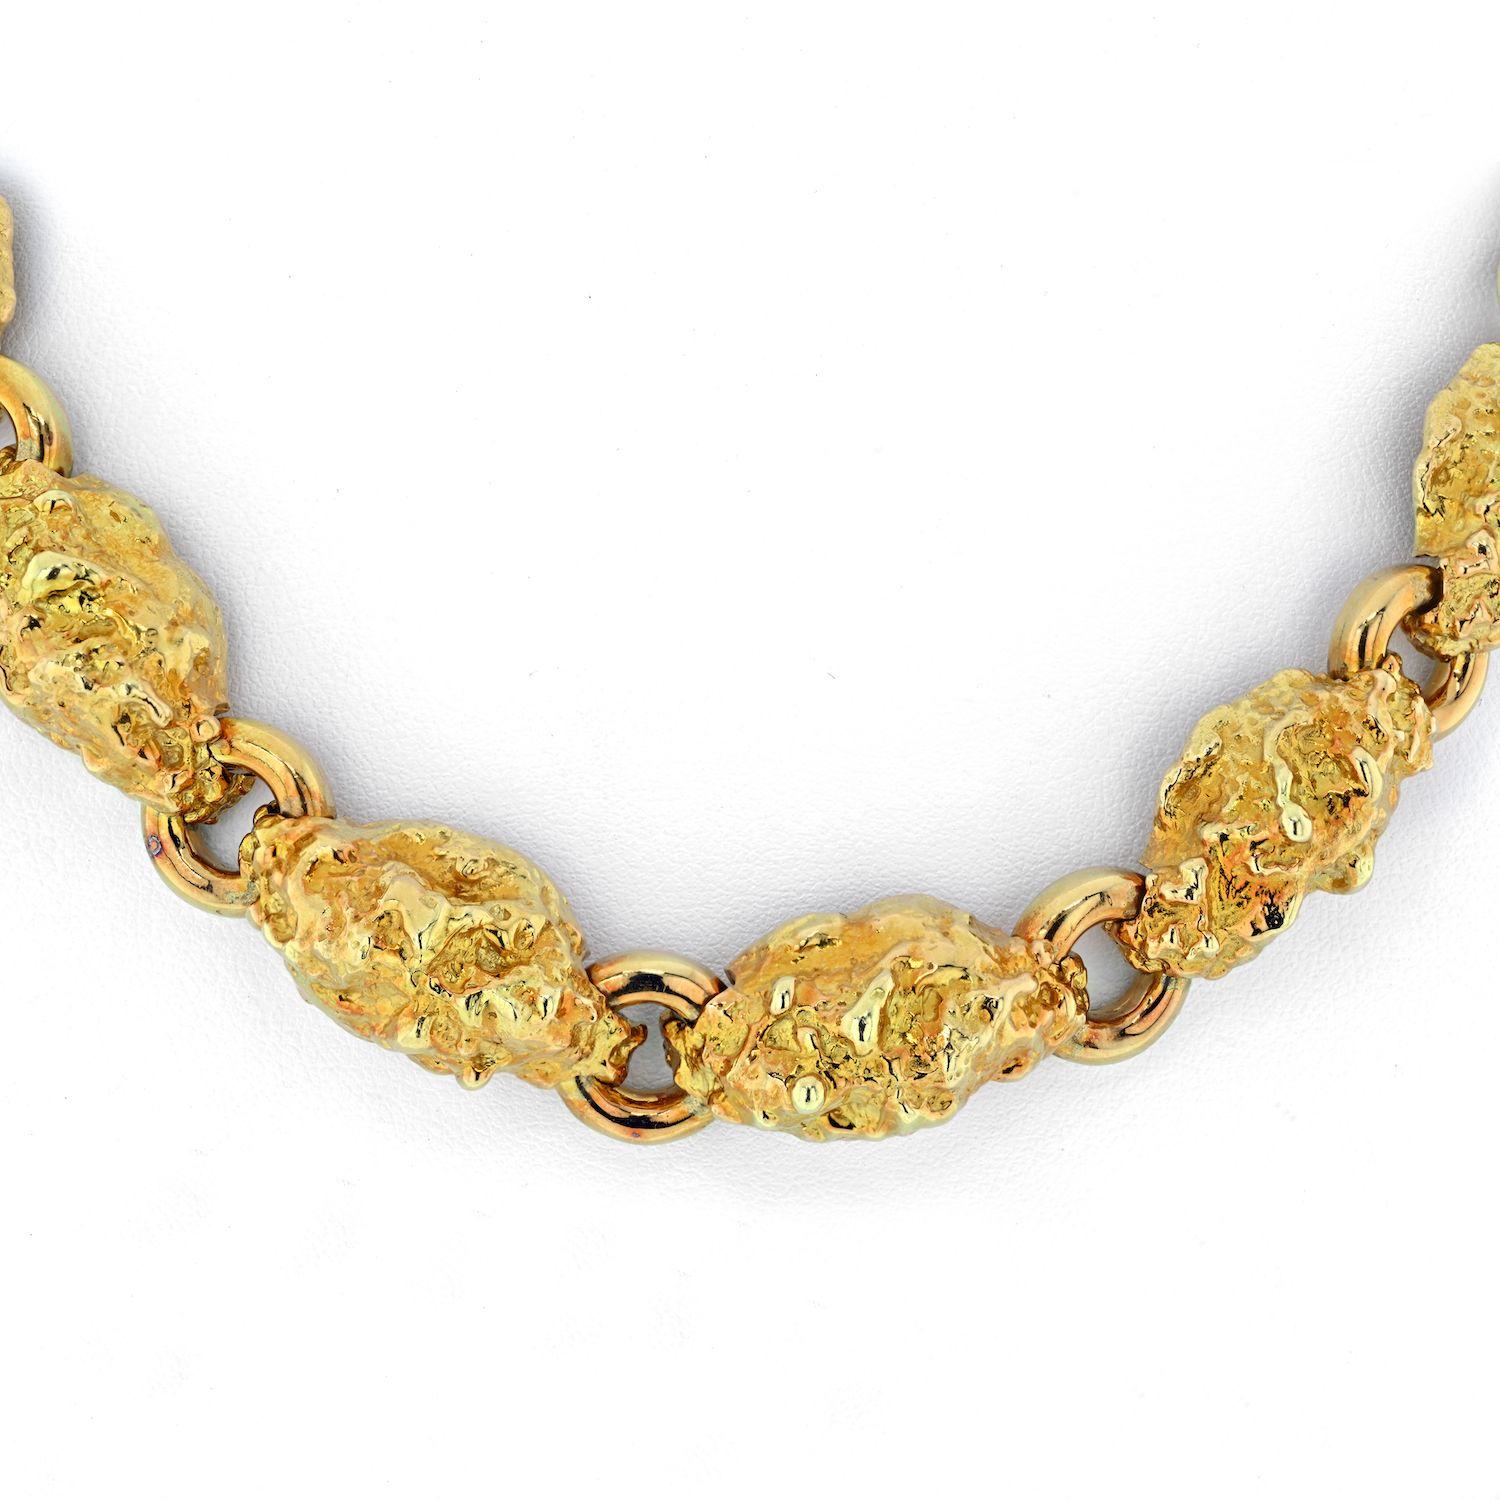 Composed of 18k yellow gold nugget style links this David Webb necklace has a graduating flow. The nuggets are of solid 18k yelow gold, and sit closely to your neck right over the collar bones. This is a perfect necklace to wear with a white-T, a